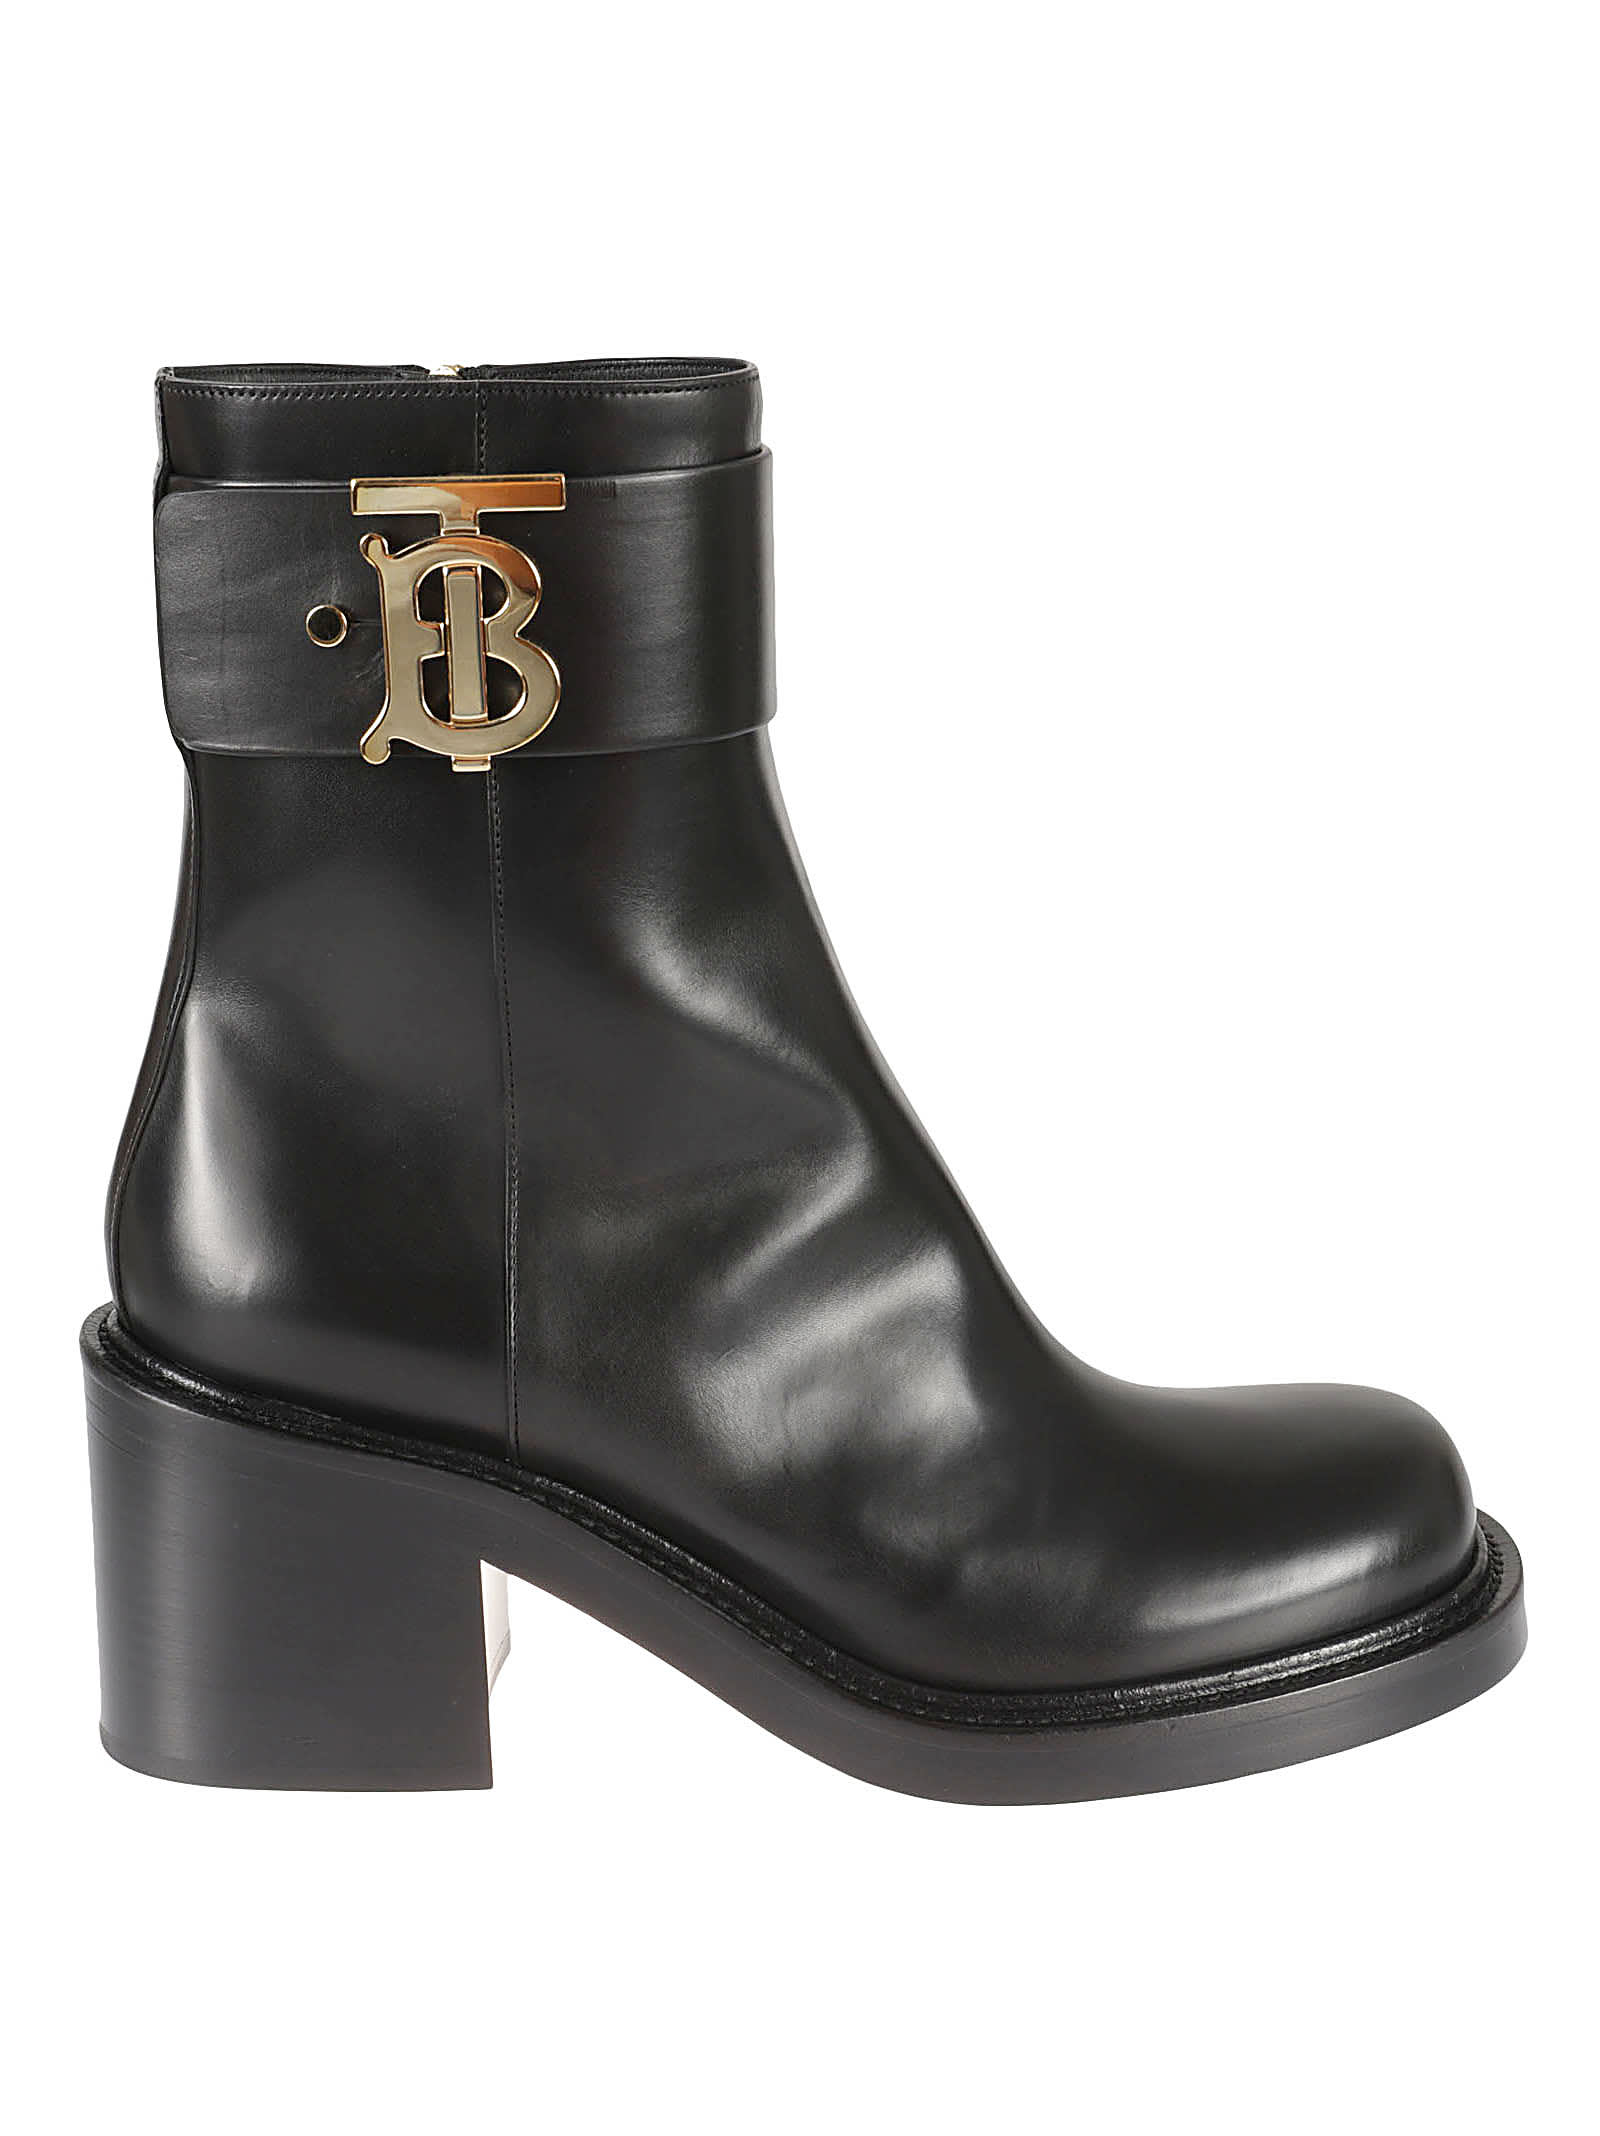 Burberry Westella Boots